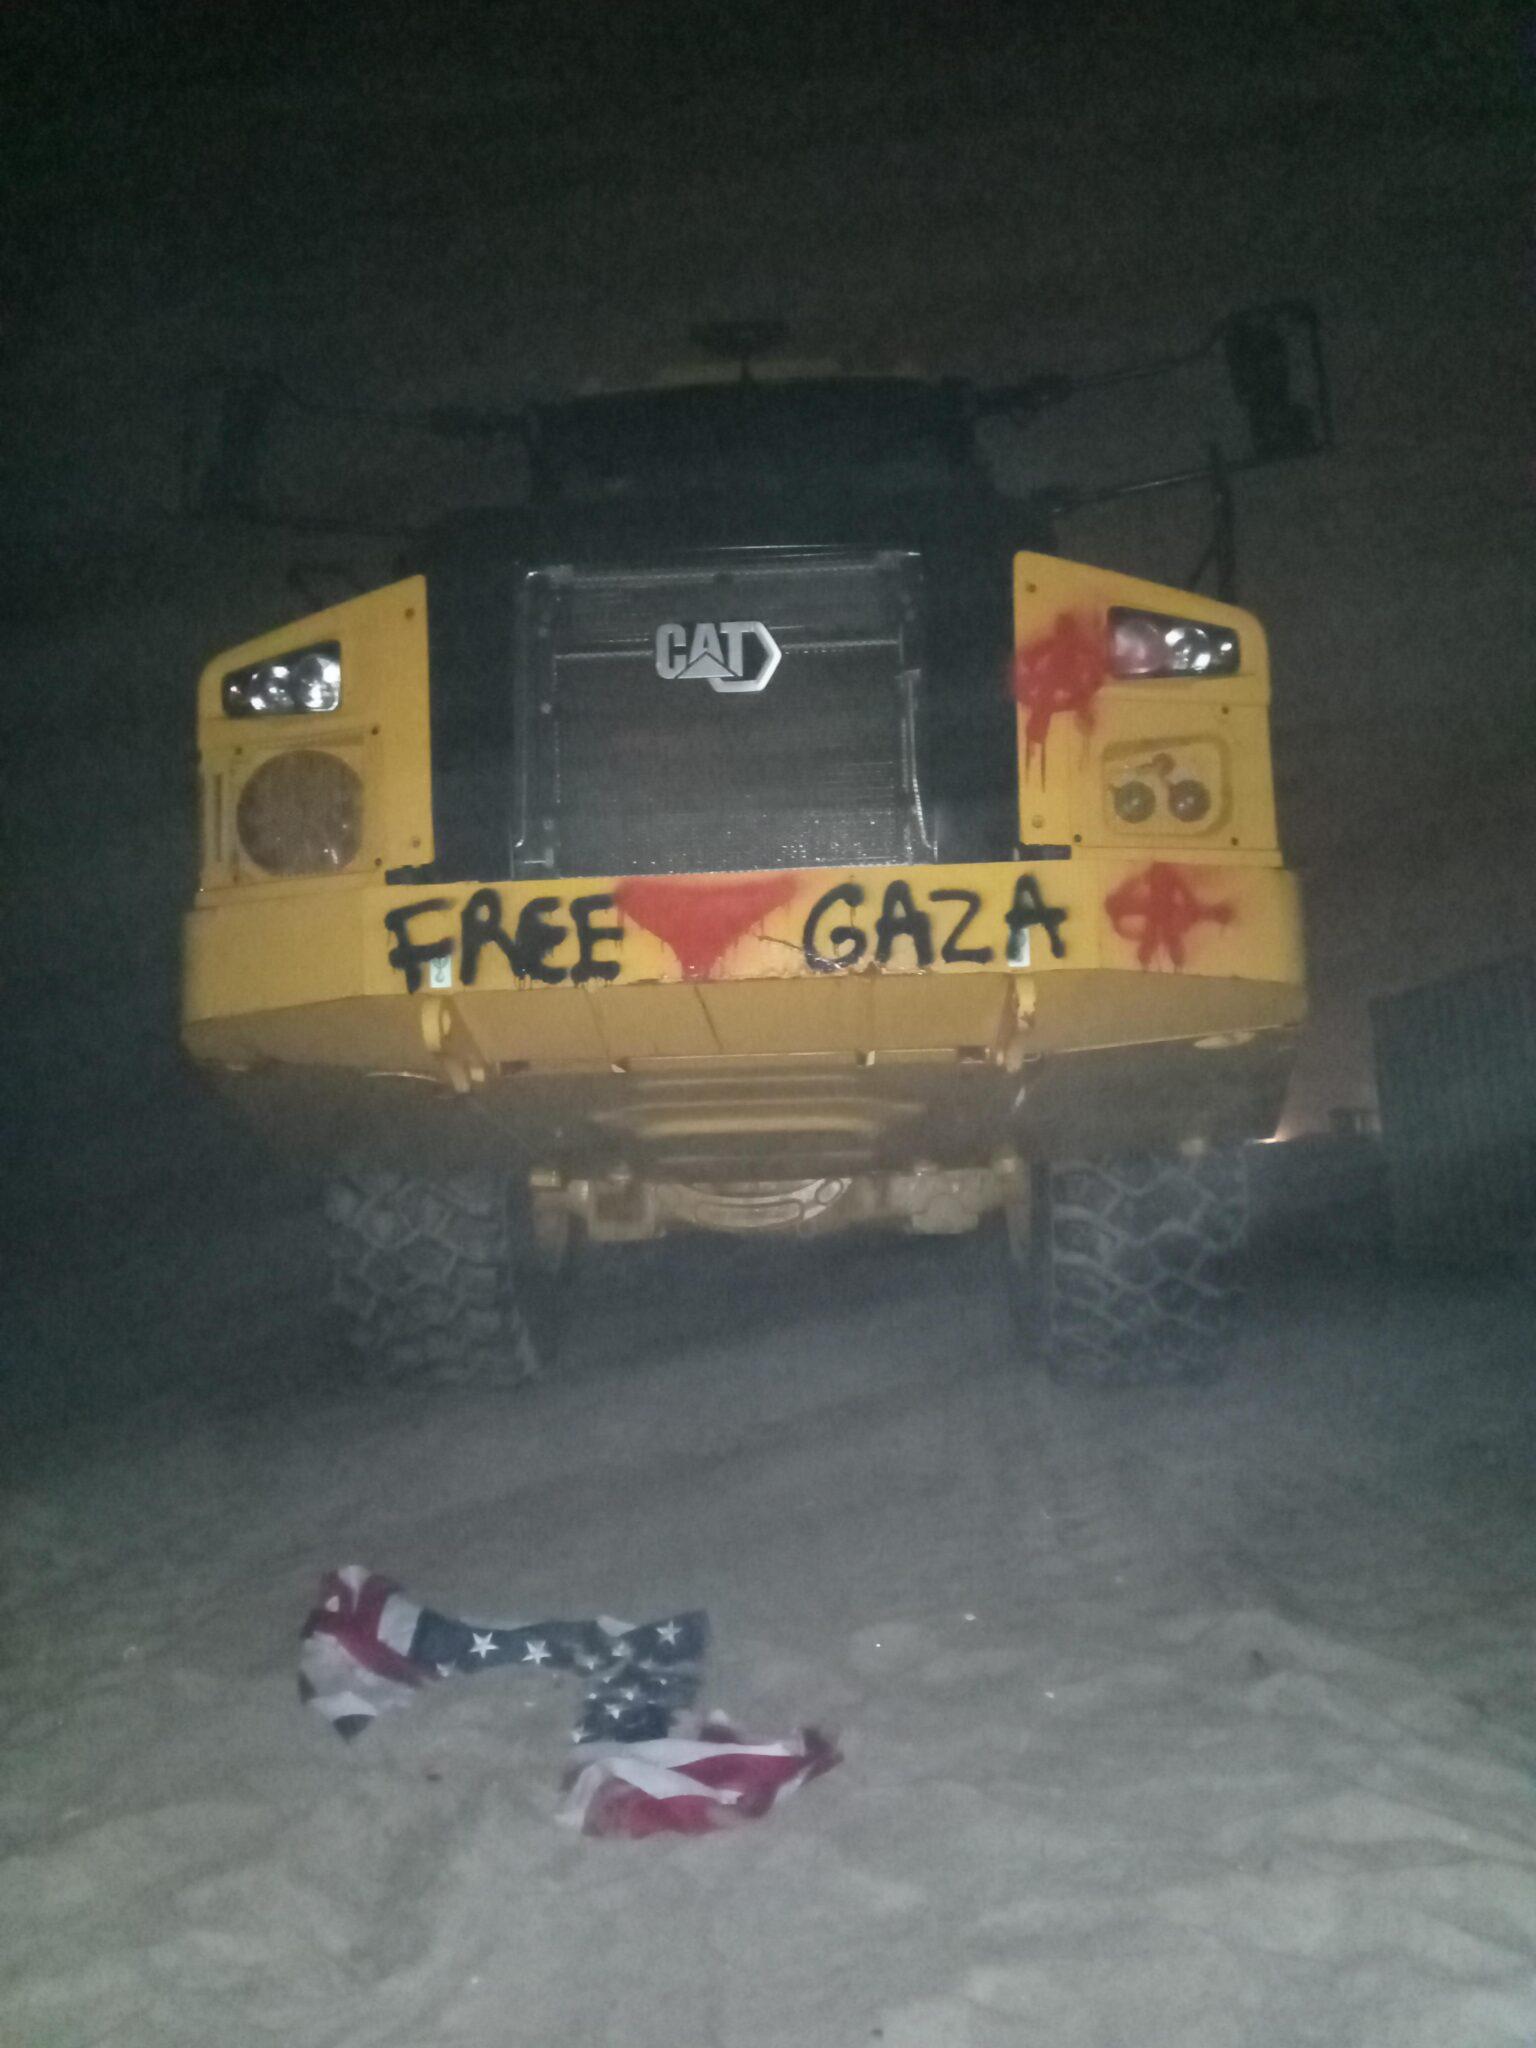 A vandalized CAT machine. Graffiti reads "FREE GAZA". There are also circle-A's and a red downward triangle. A torn American flag lies in the foreground.